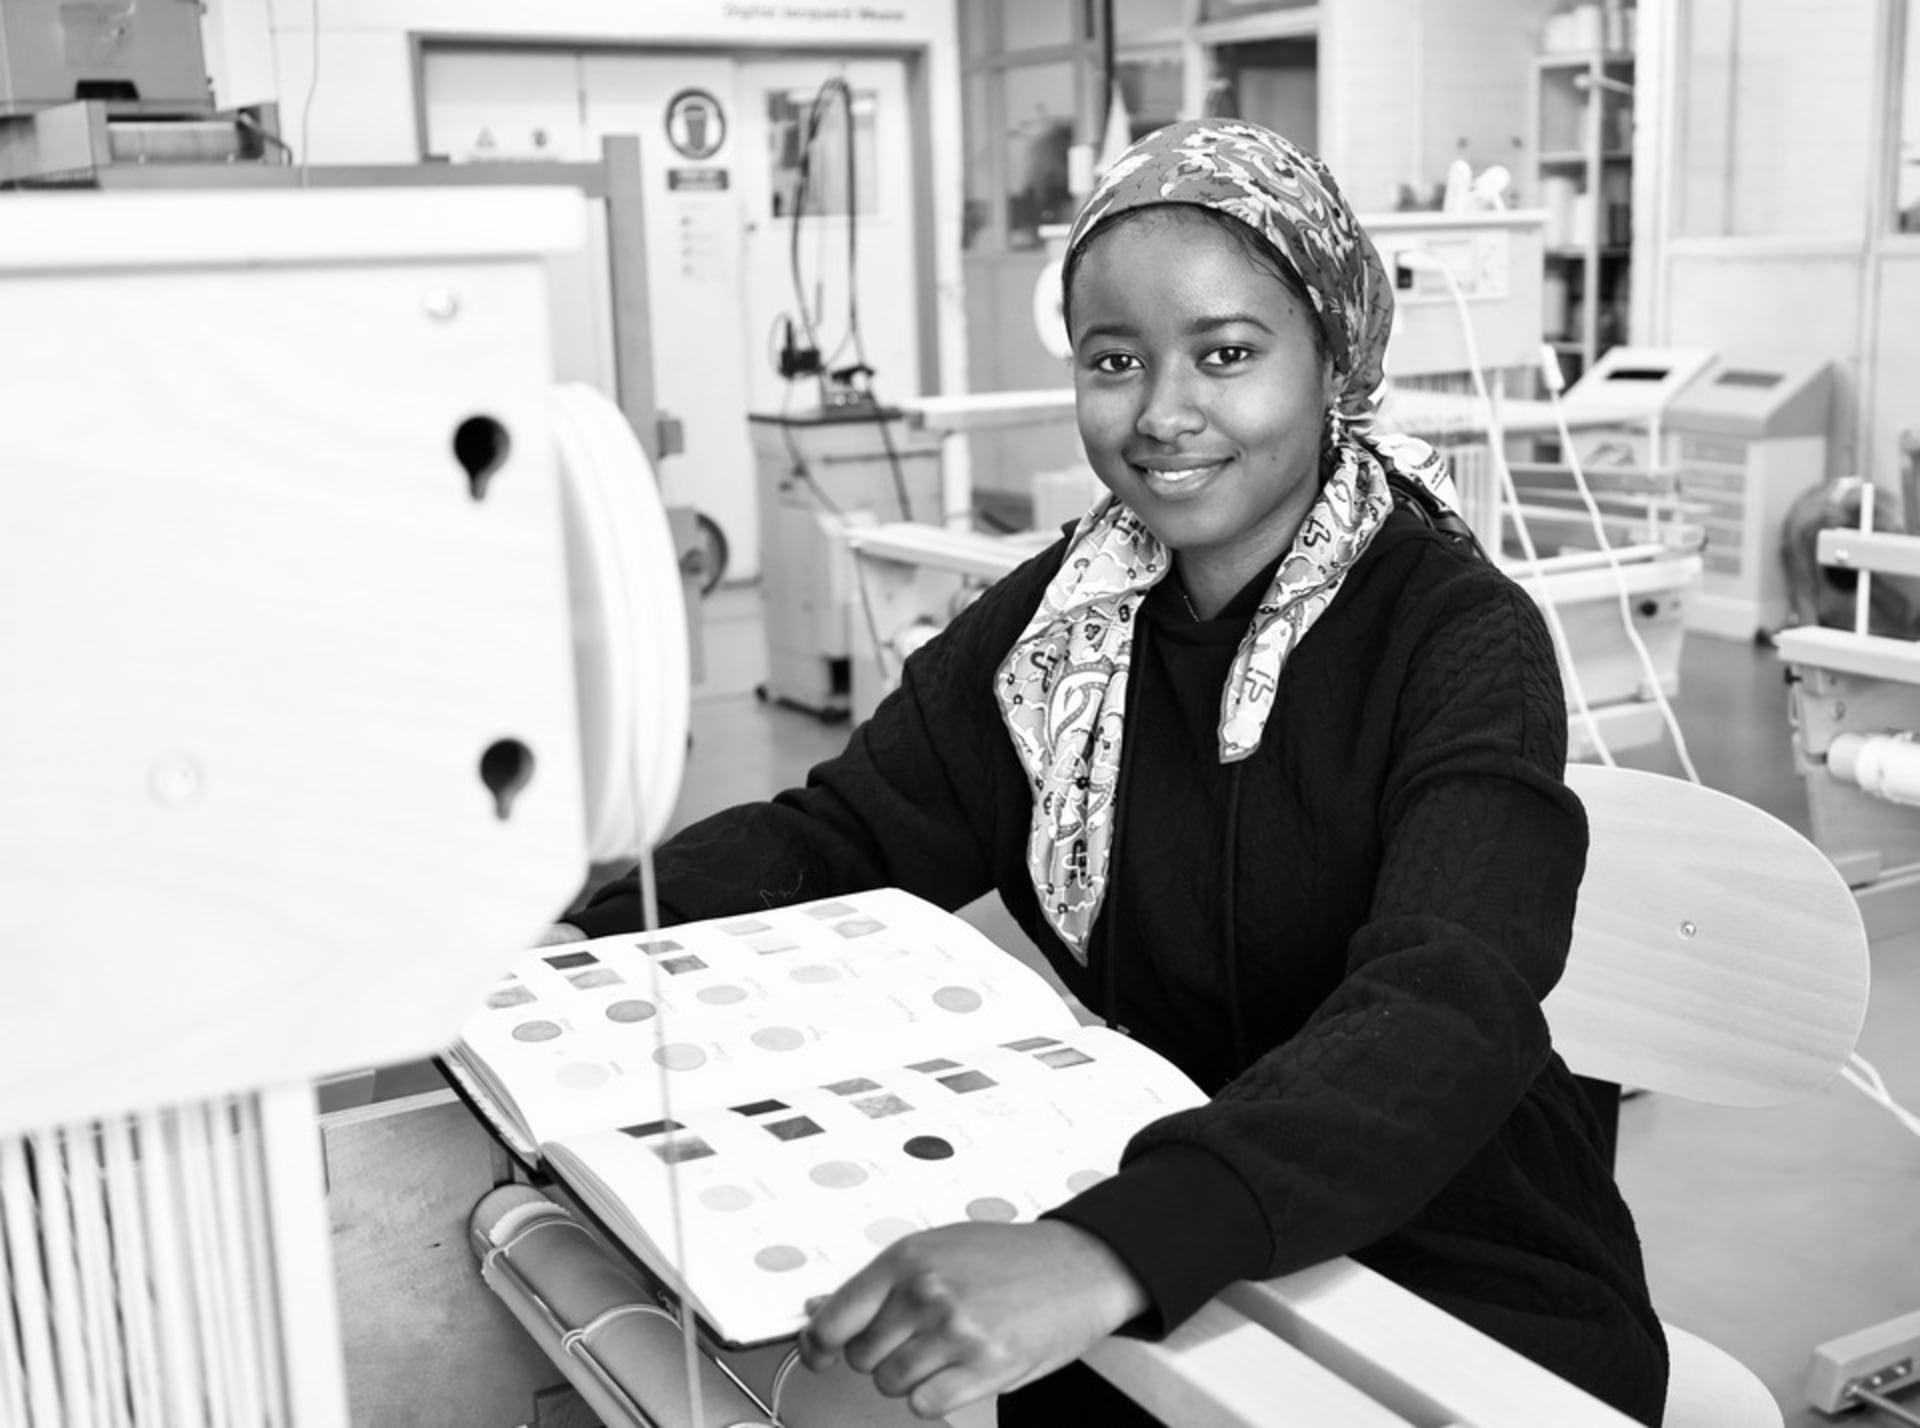 Sauda Imam at the weave studio at Royal College of Art. Imam is sitting in front of a loom with her colourful sketchbook.